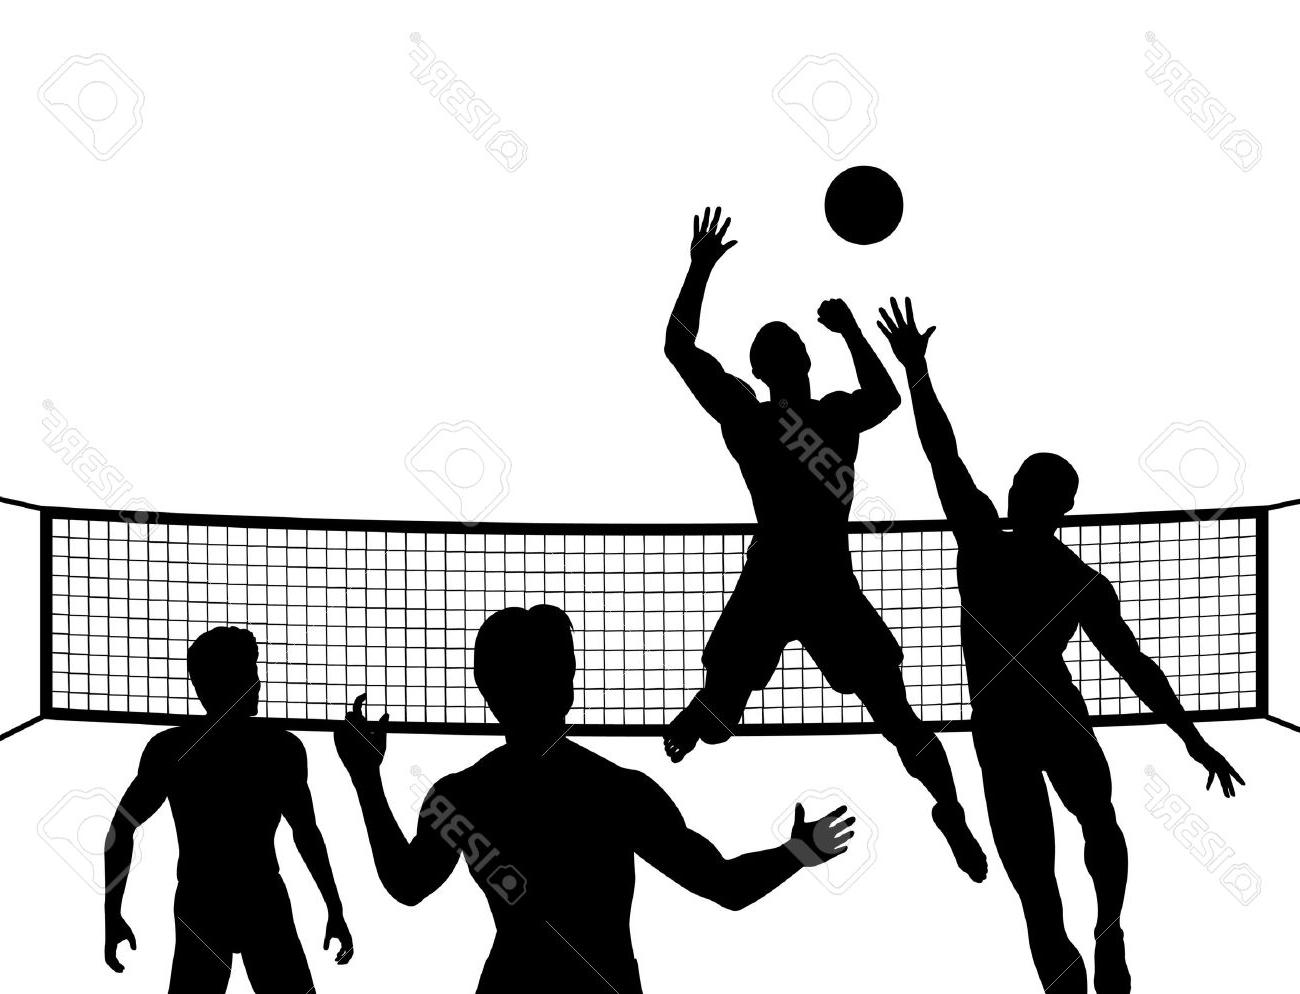 Volleyball Silhouettes | Free download on ClipArtMag